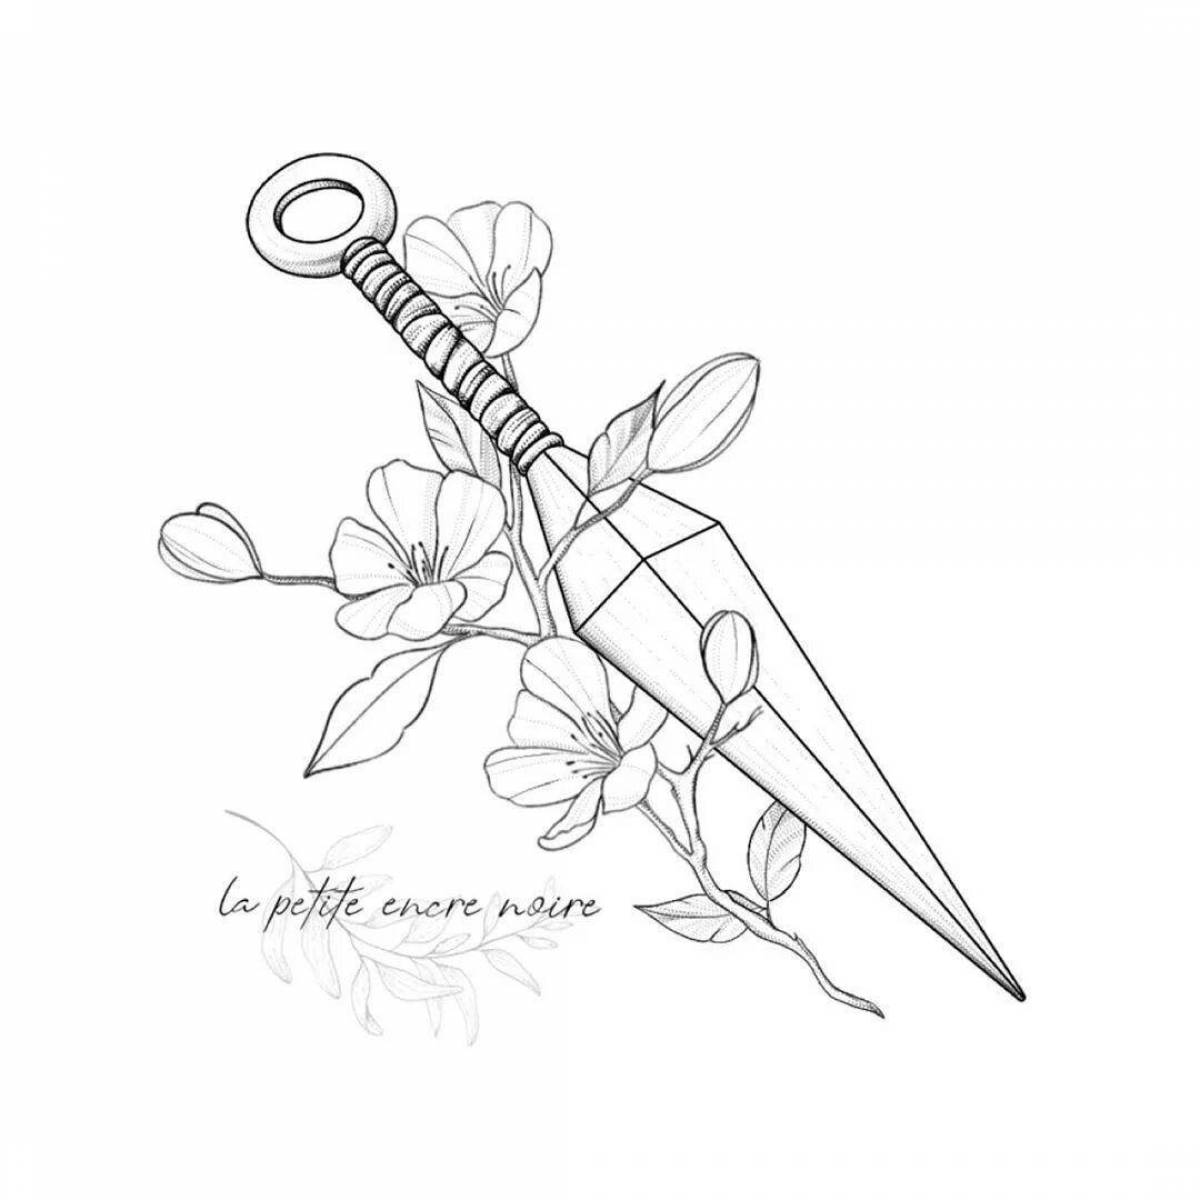 Crisp kunai from standoff 2 coloring page